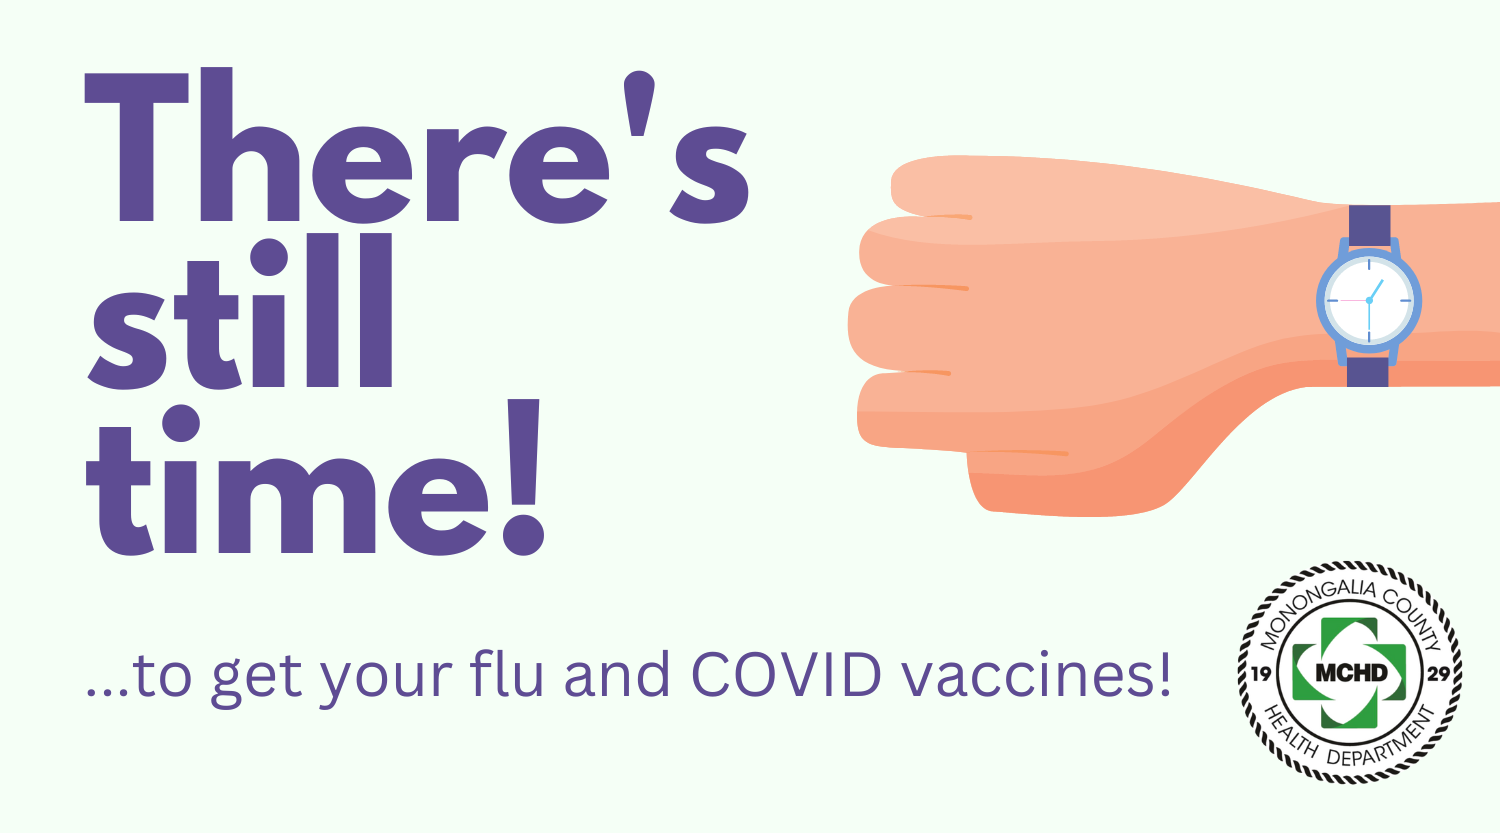 It's a Good Time to Get Your Flu Vaccine